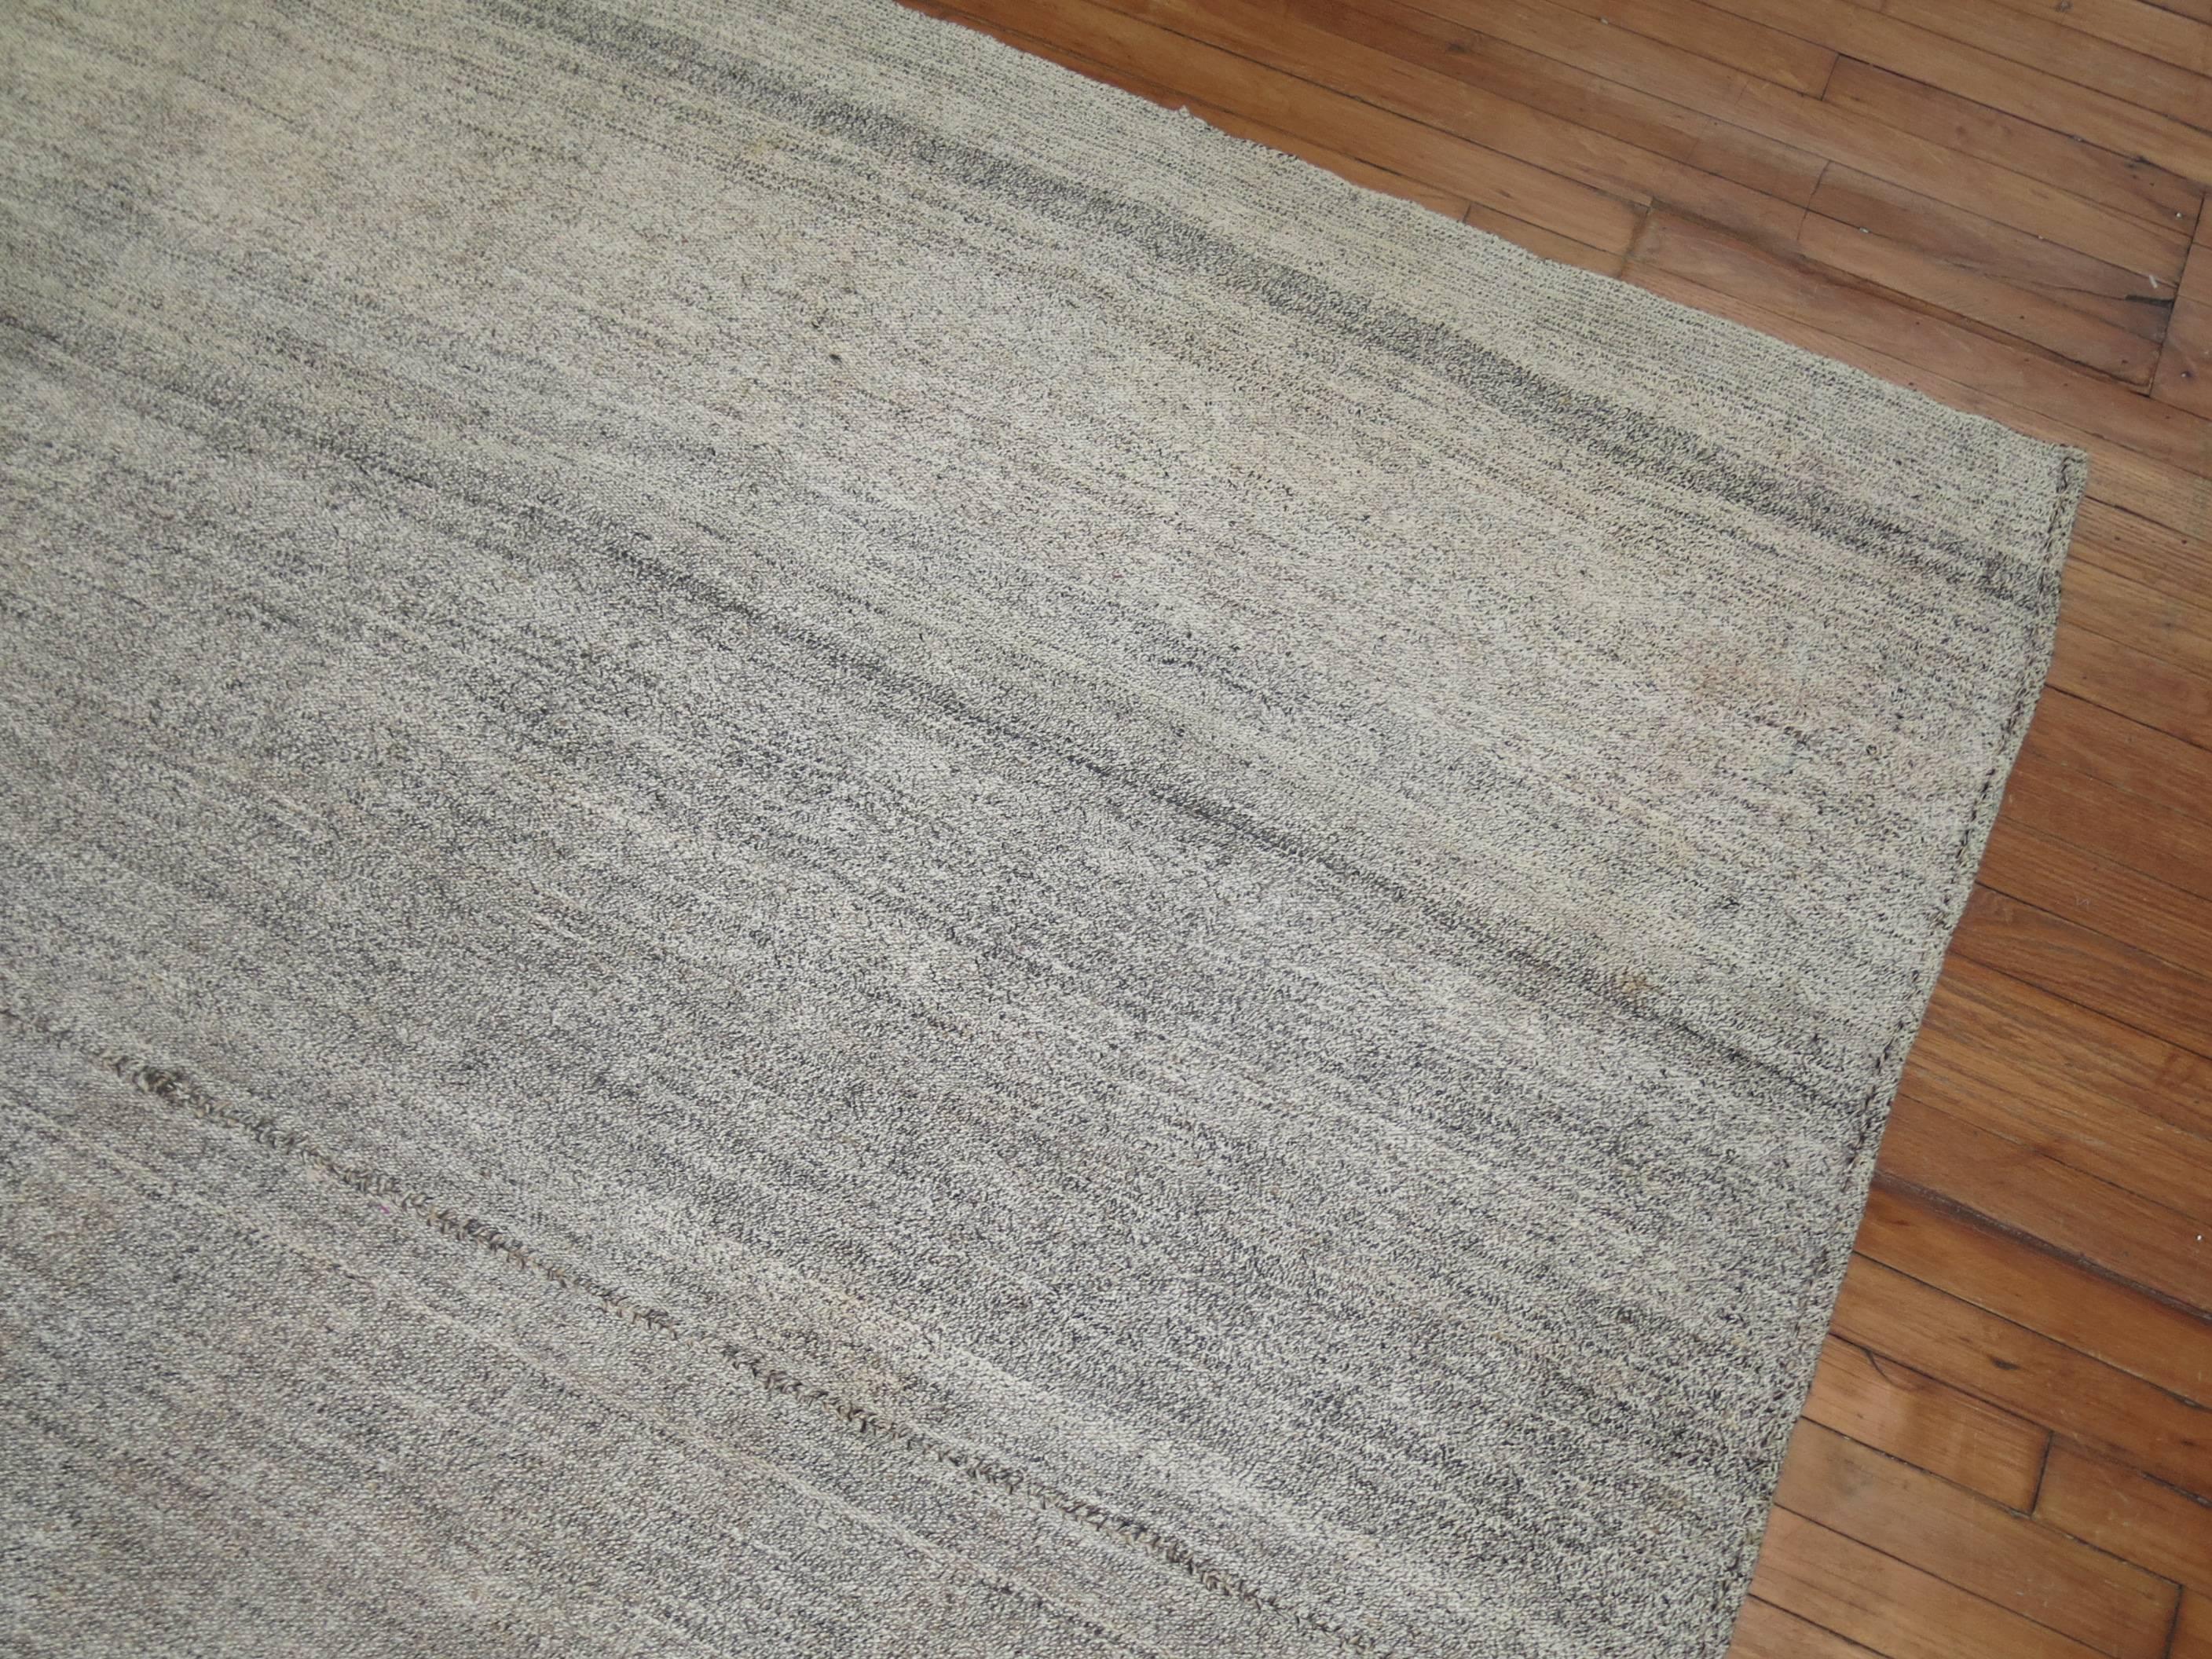 Gray Turkish Minimalist Kilim In Good Condition For Sale In New York, NY